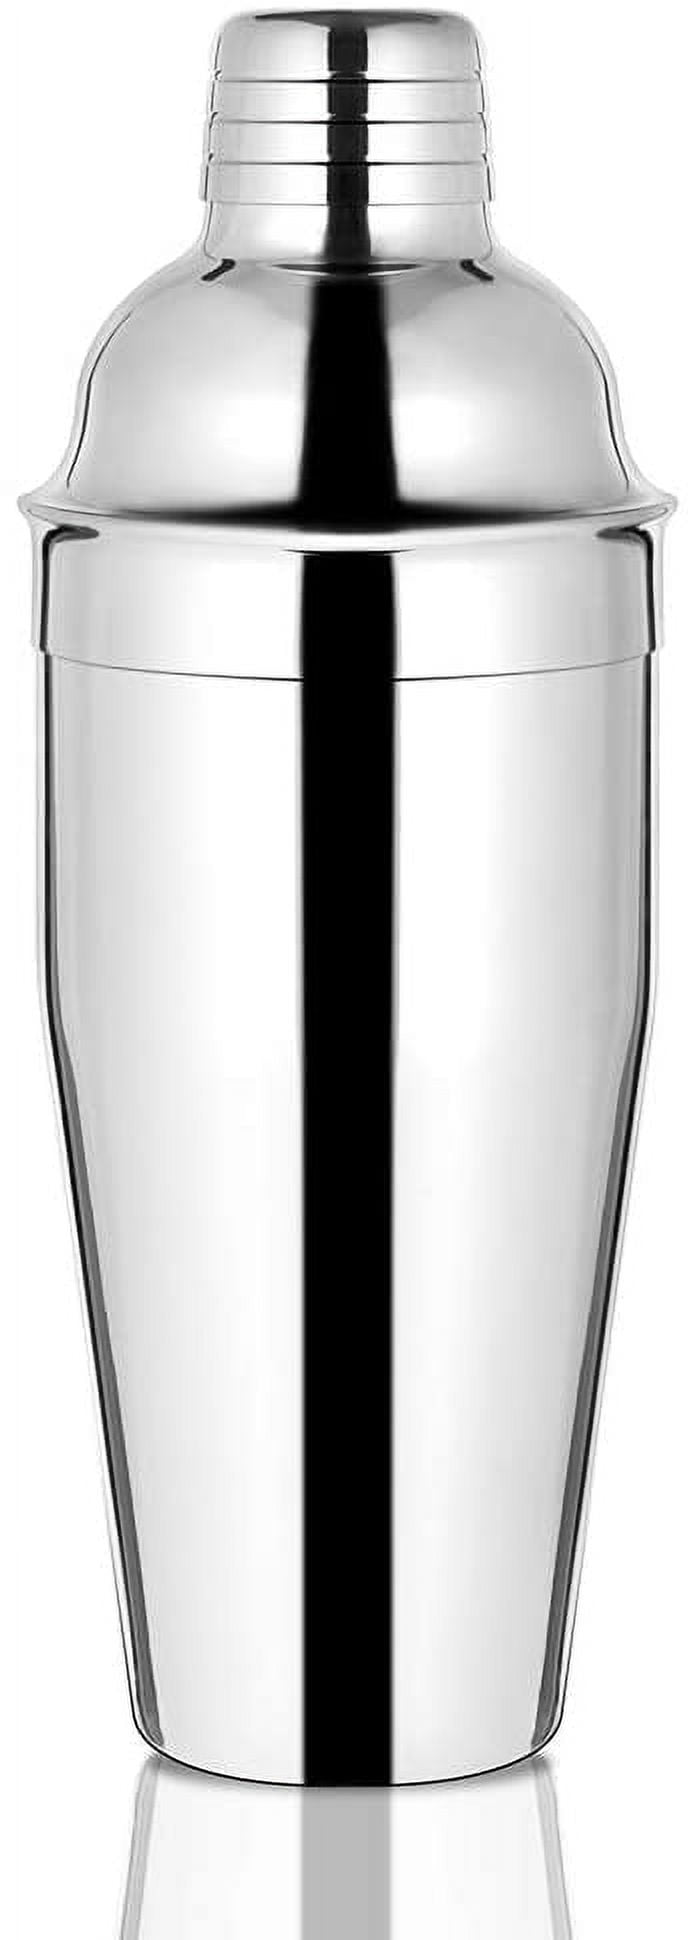 Black And Mild Stainless Steel Cocktail Shaker Mixer Drink Bartender Martini  Bar